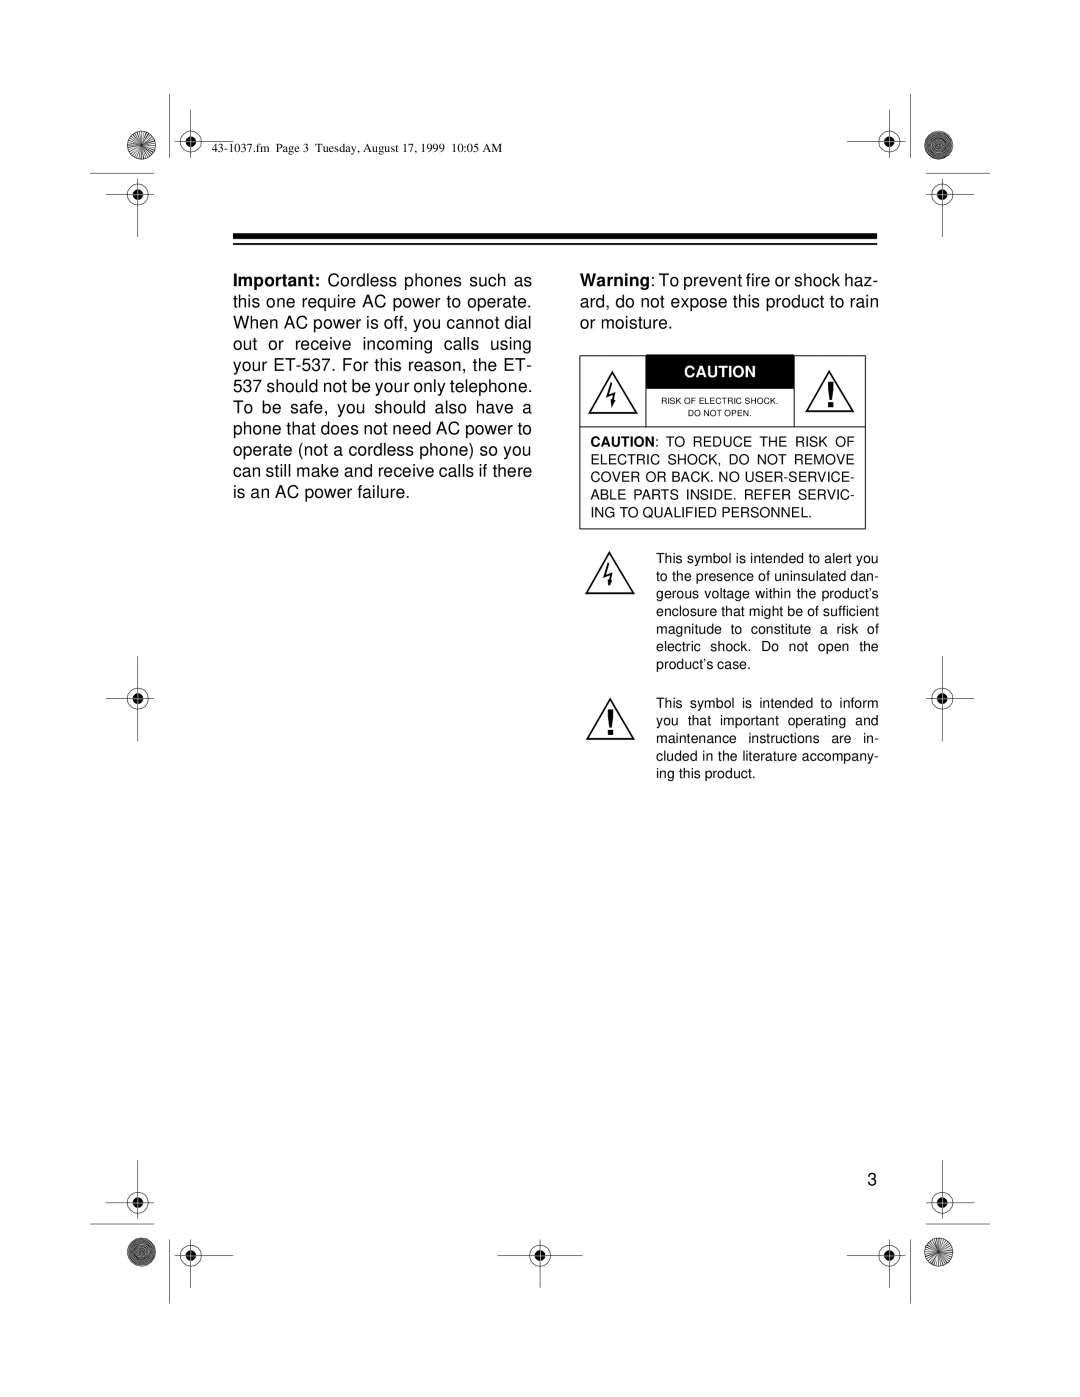 Radio Shack ET-537 owner manual Fm Page 3 Tuesday, August 17, 1999 1005 AM 